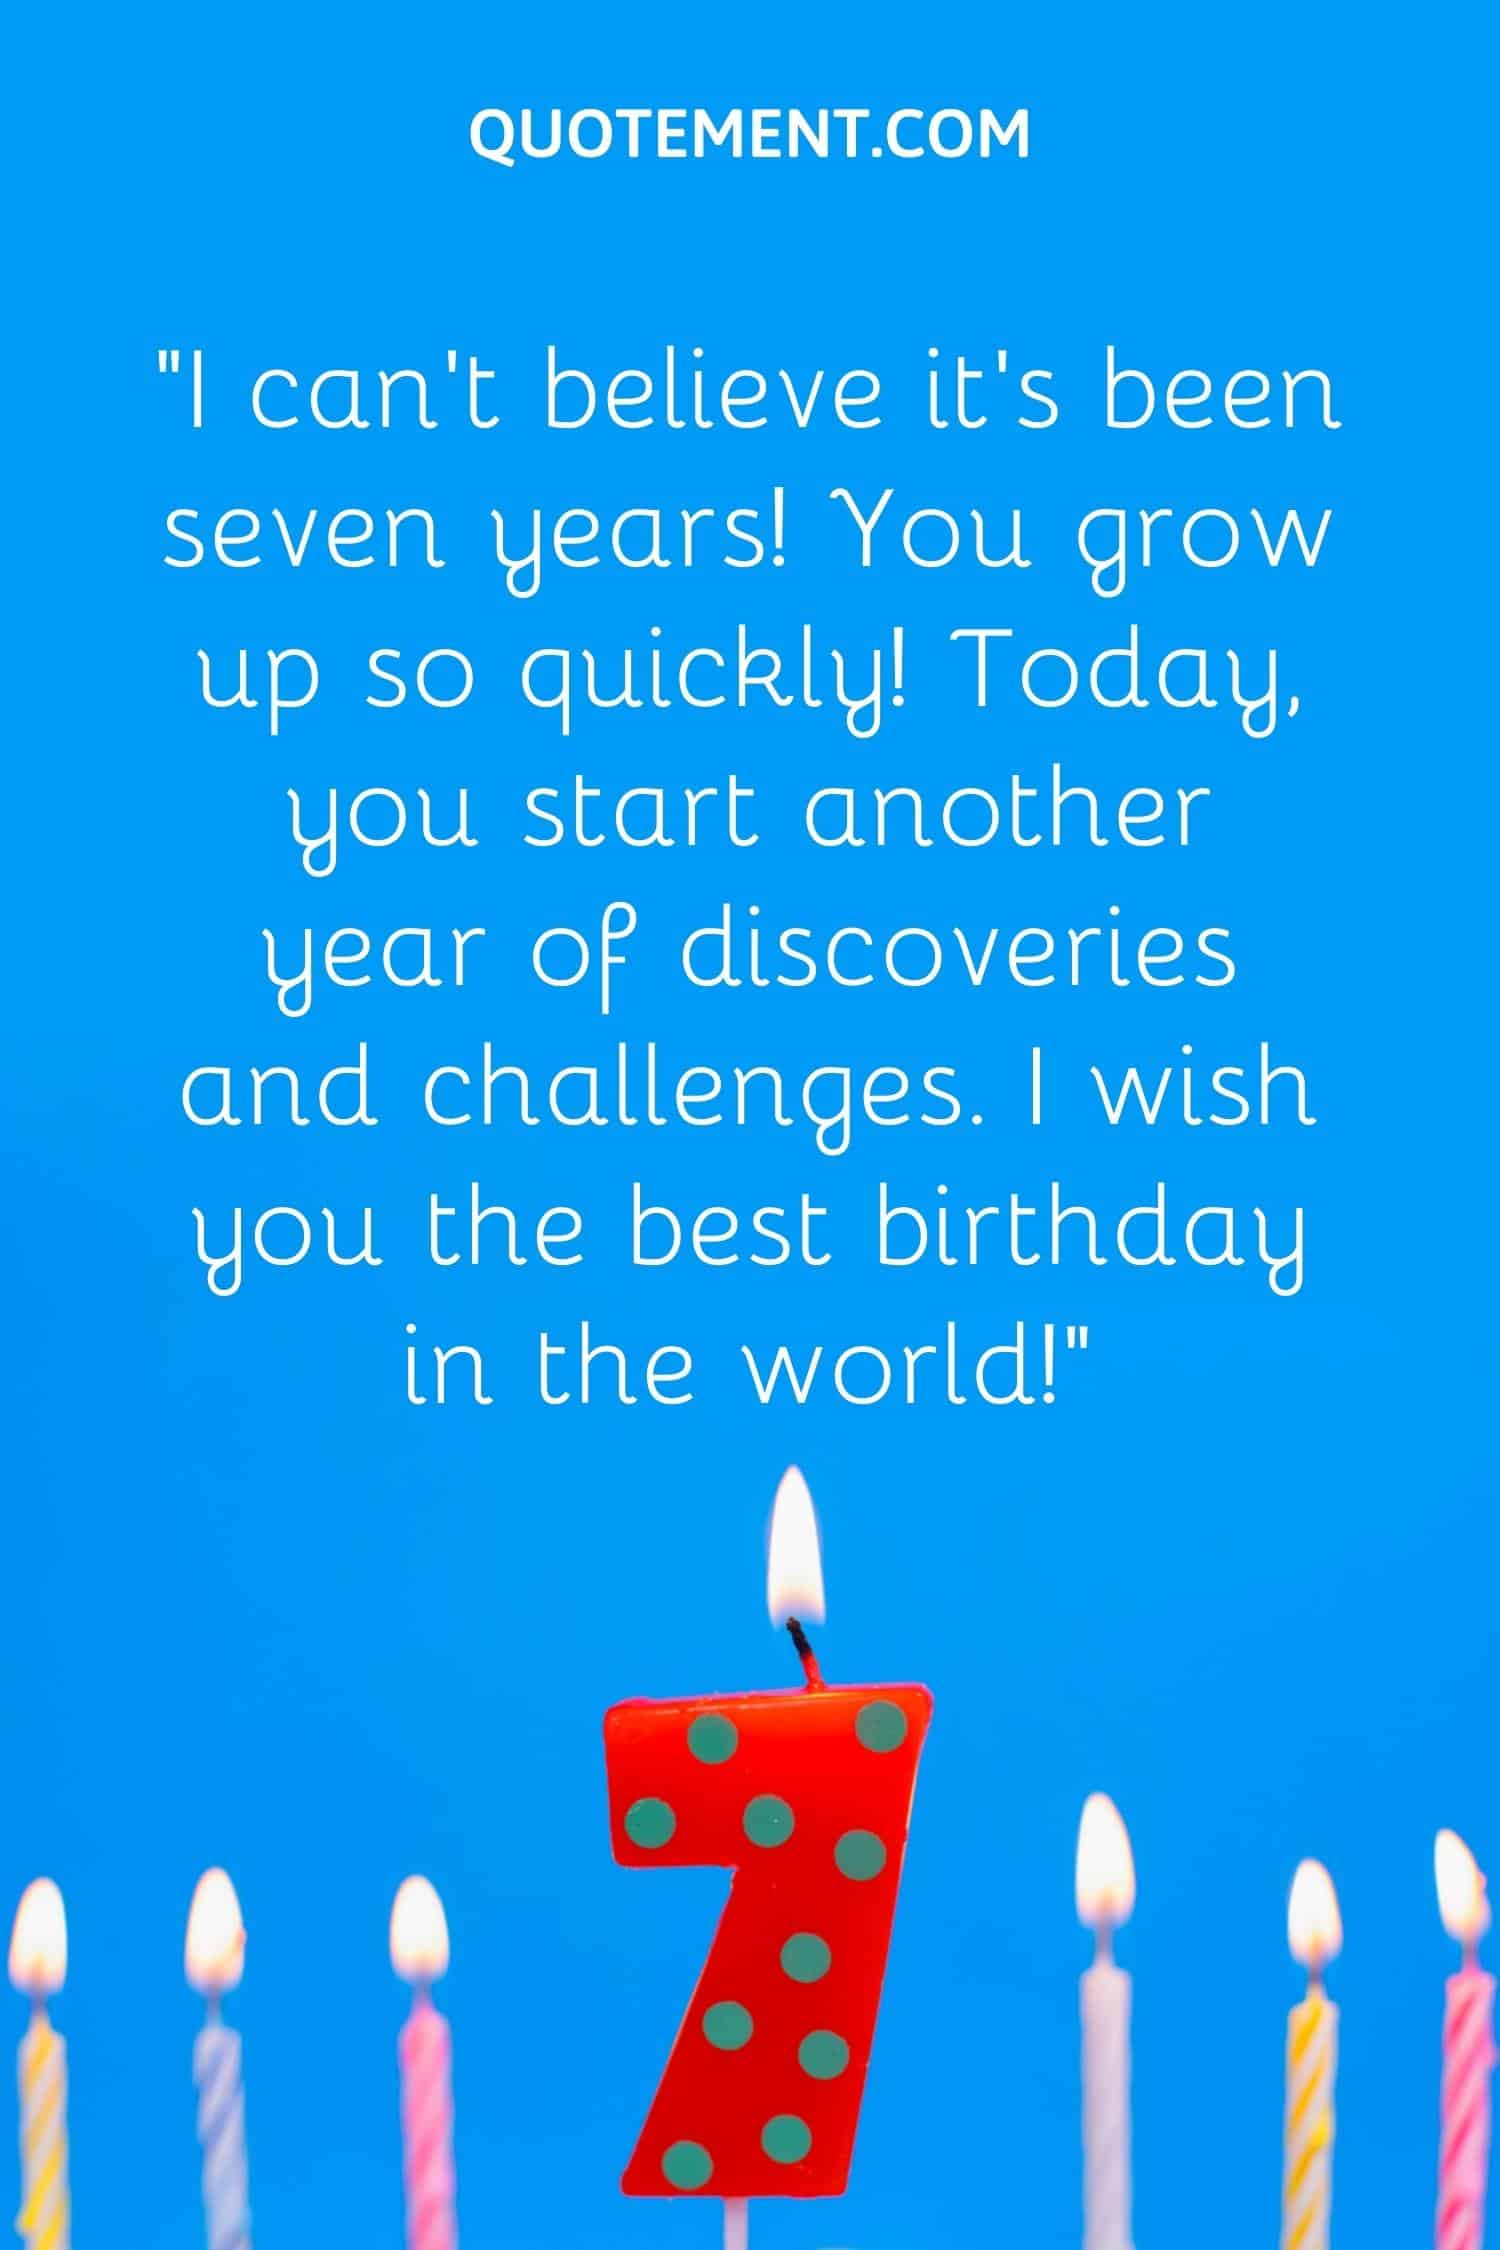 “I can’t believe it’s been seven years! You grow up so quickly! Today, you start another year of discoveries and challenges. I wish you the best birthday in the world!”